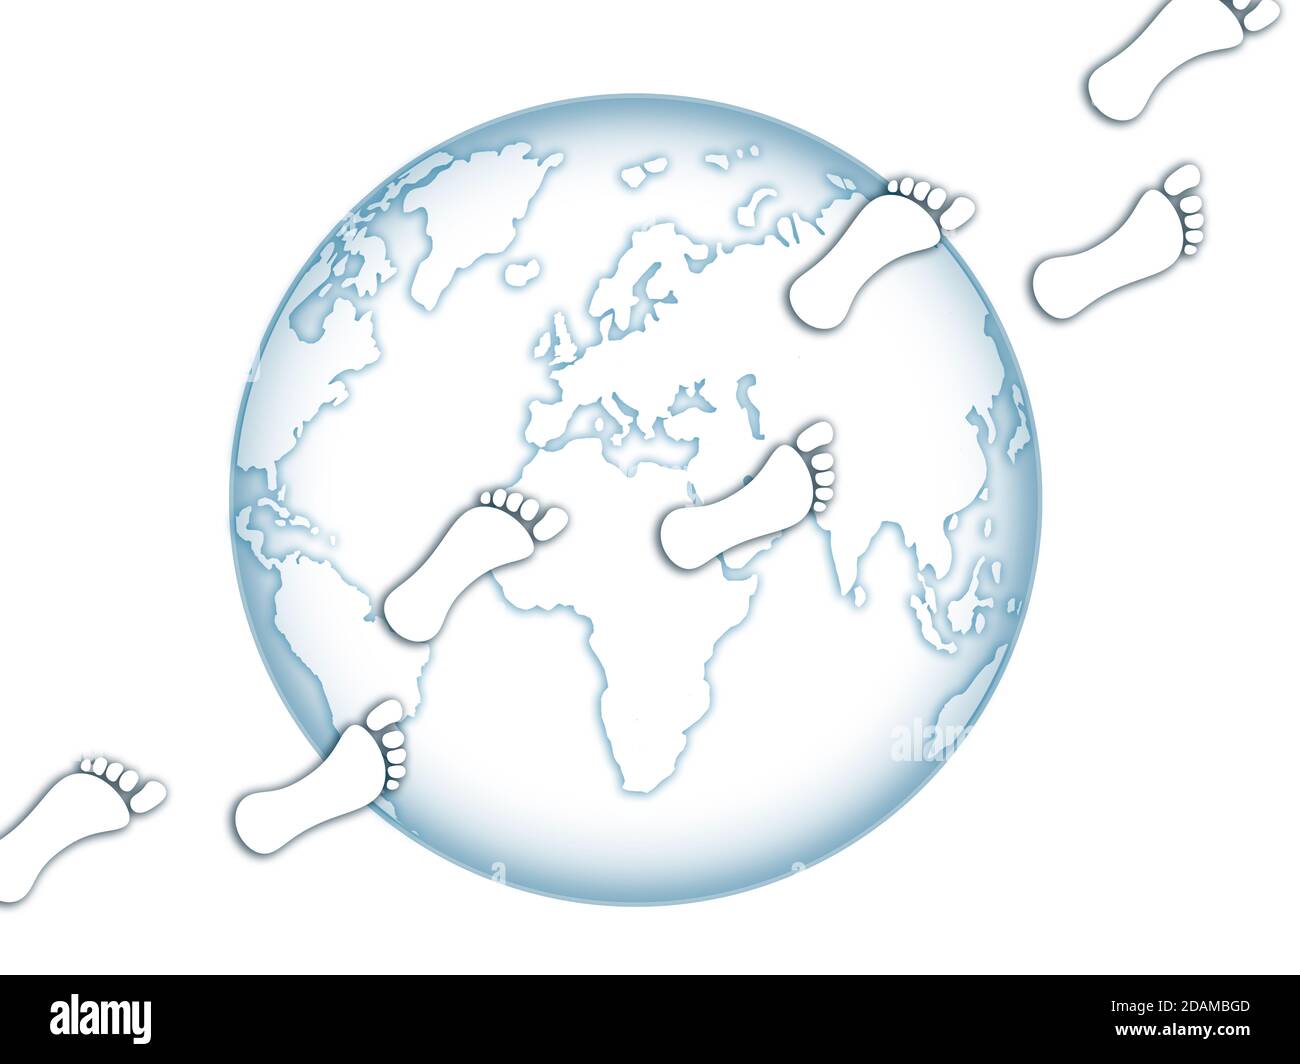 Earth with carbon footprint trail, illustration. Stock Photo